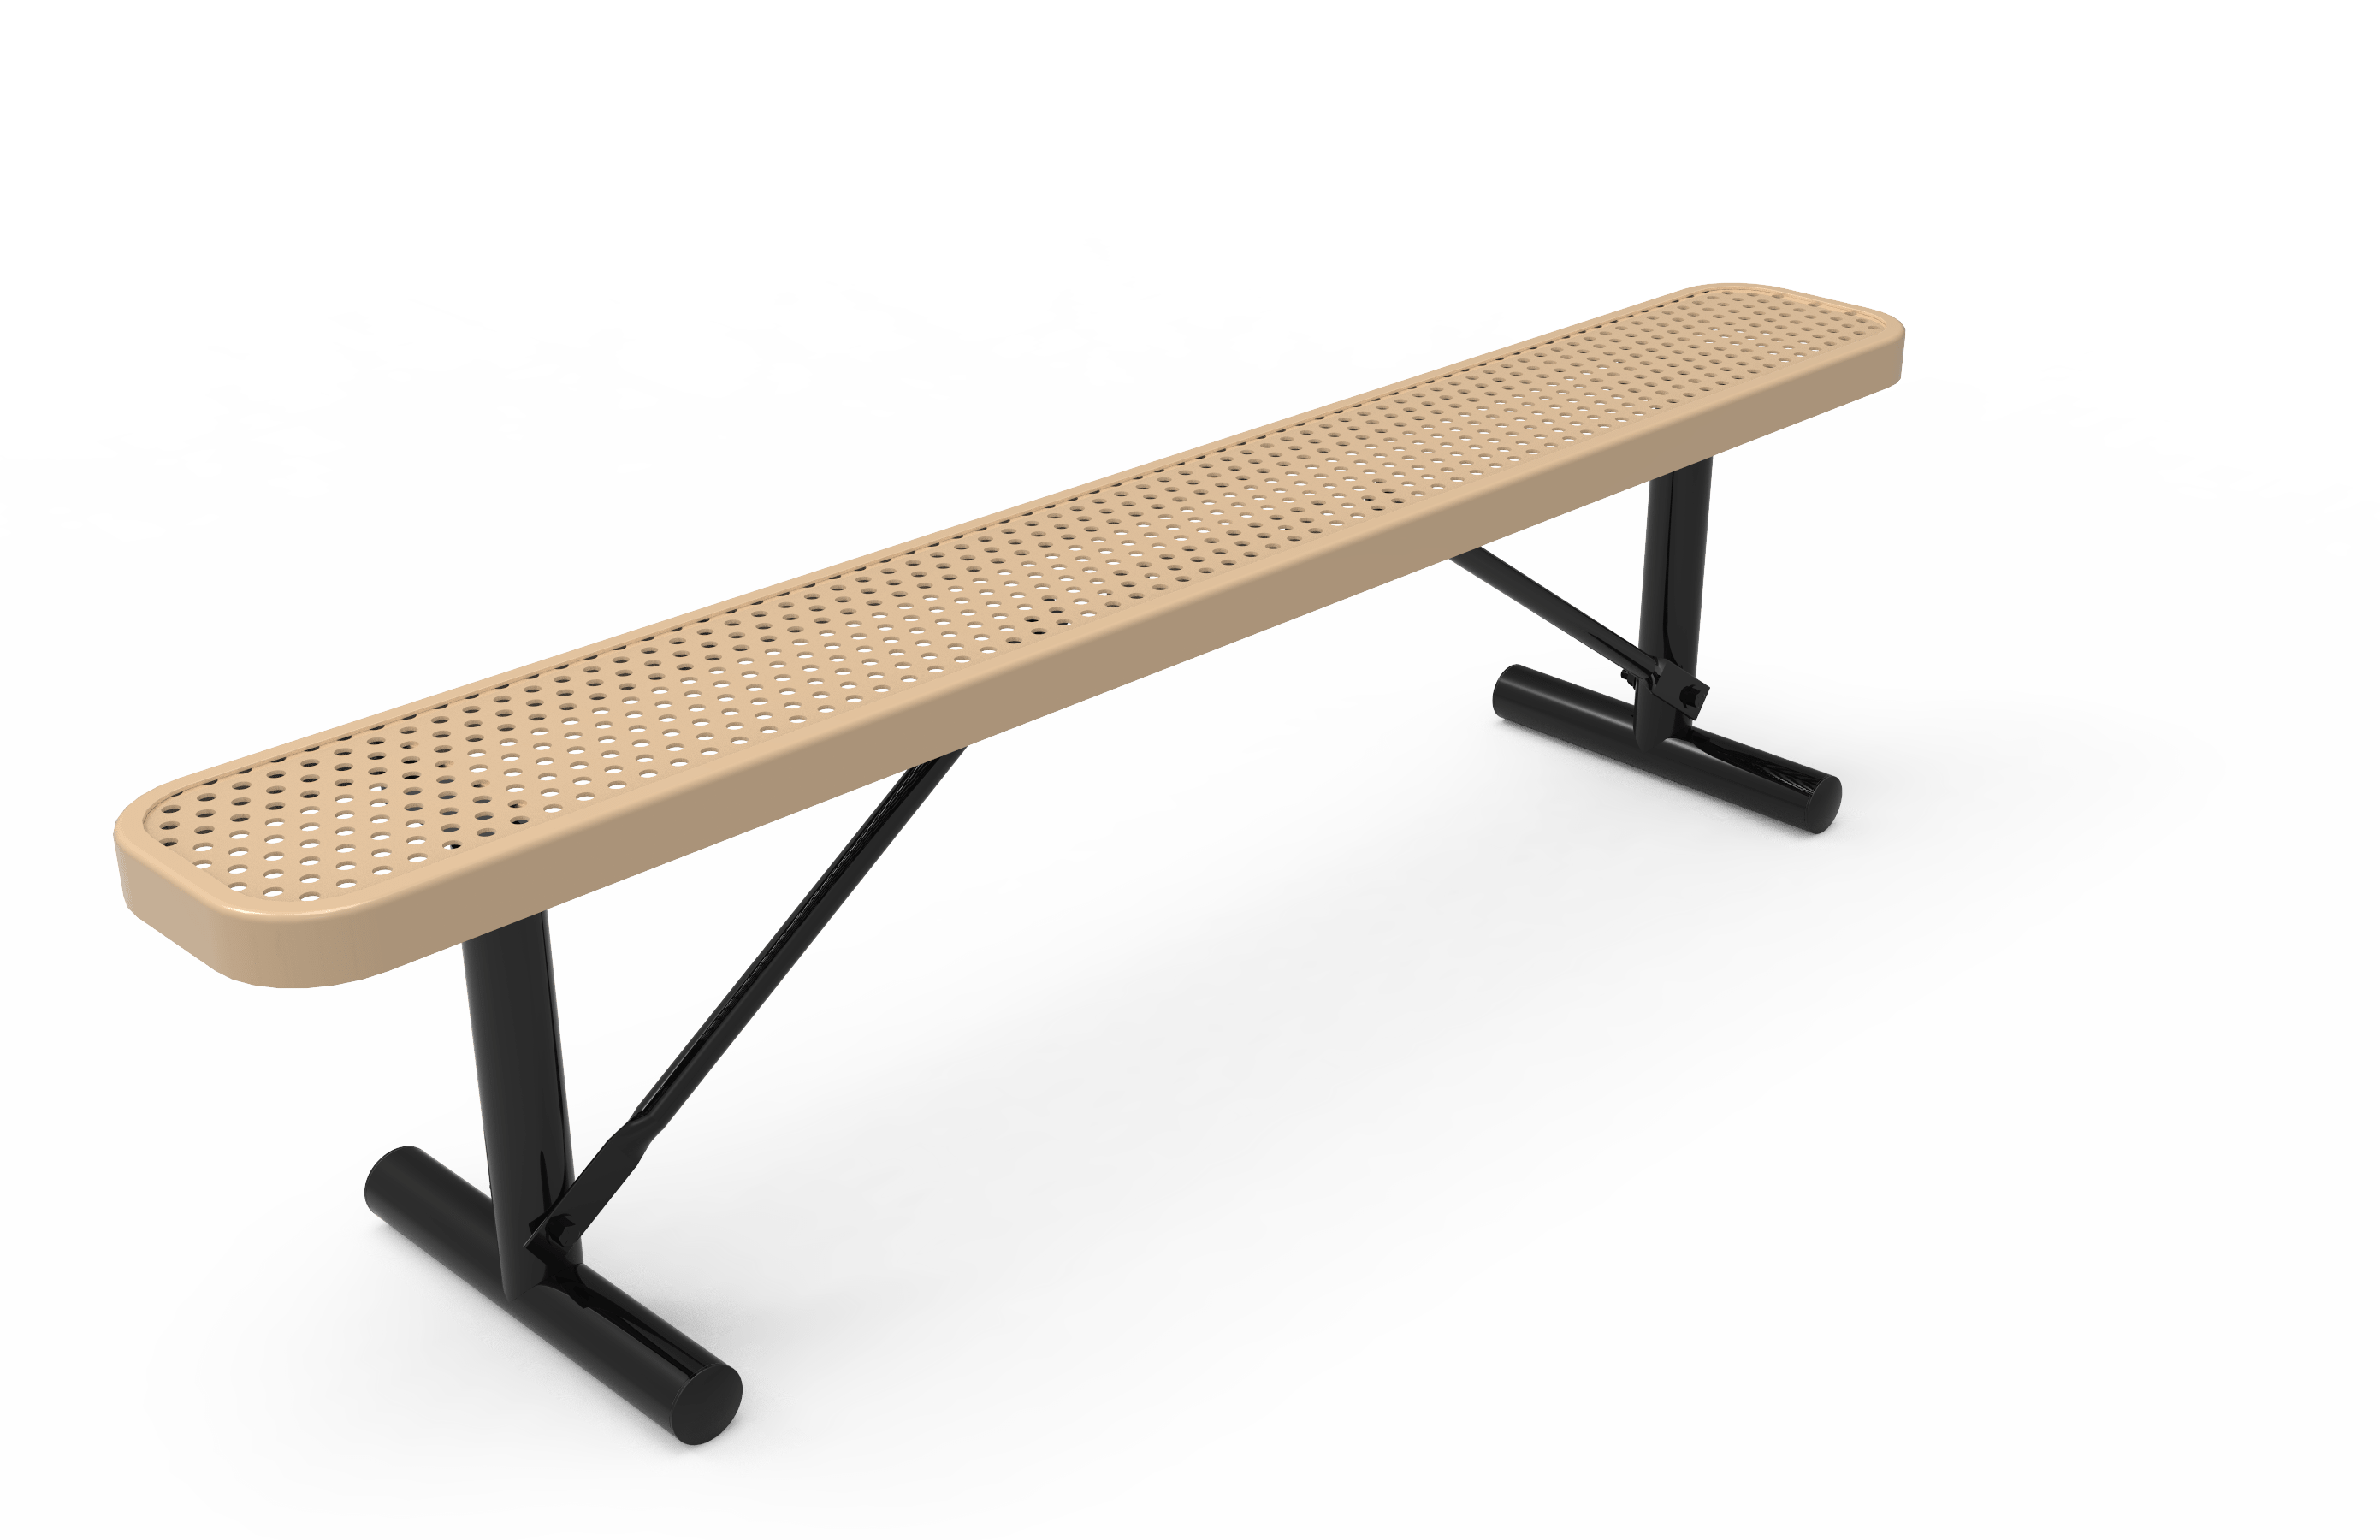 6′ Standard Bench Without Back-Punched
BRT06-D-21-000
Industry Standard Finish
$369.00
BRT06-B-21-000
Advantage Premium Finish
$449.00
